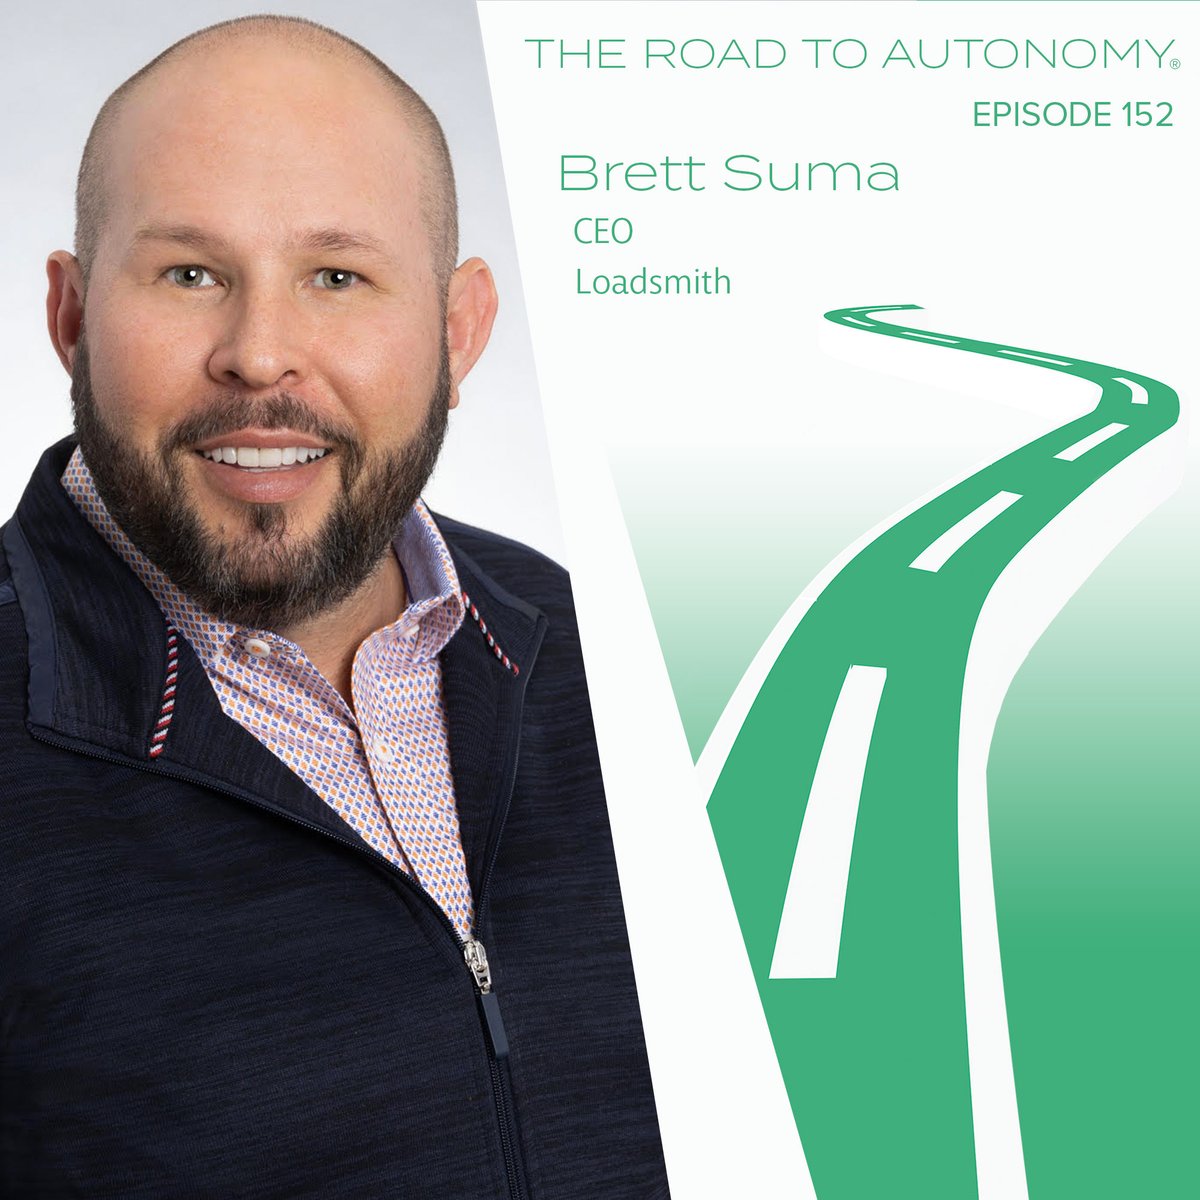 Brett Suma, CEO, Loadsmith joined @gbrulte on The Road to Autonomy podcast to discuss the development of the Loadsmith Freight Network and how the network will create economic stimulus in local communities. Listen today on your favorite podcast platform. roadtoautonomy.com/loadsmith-frei…